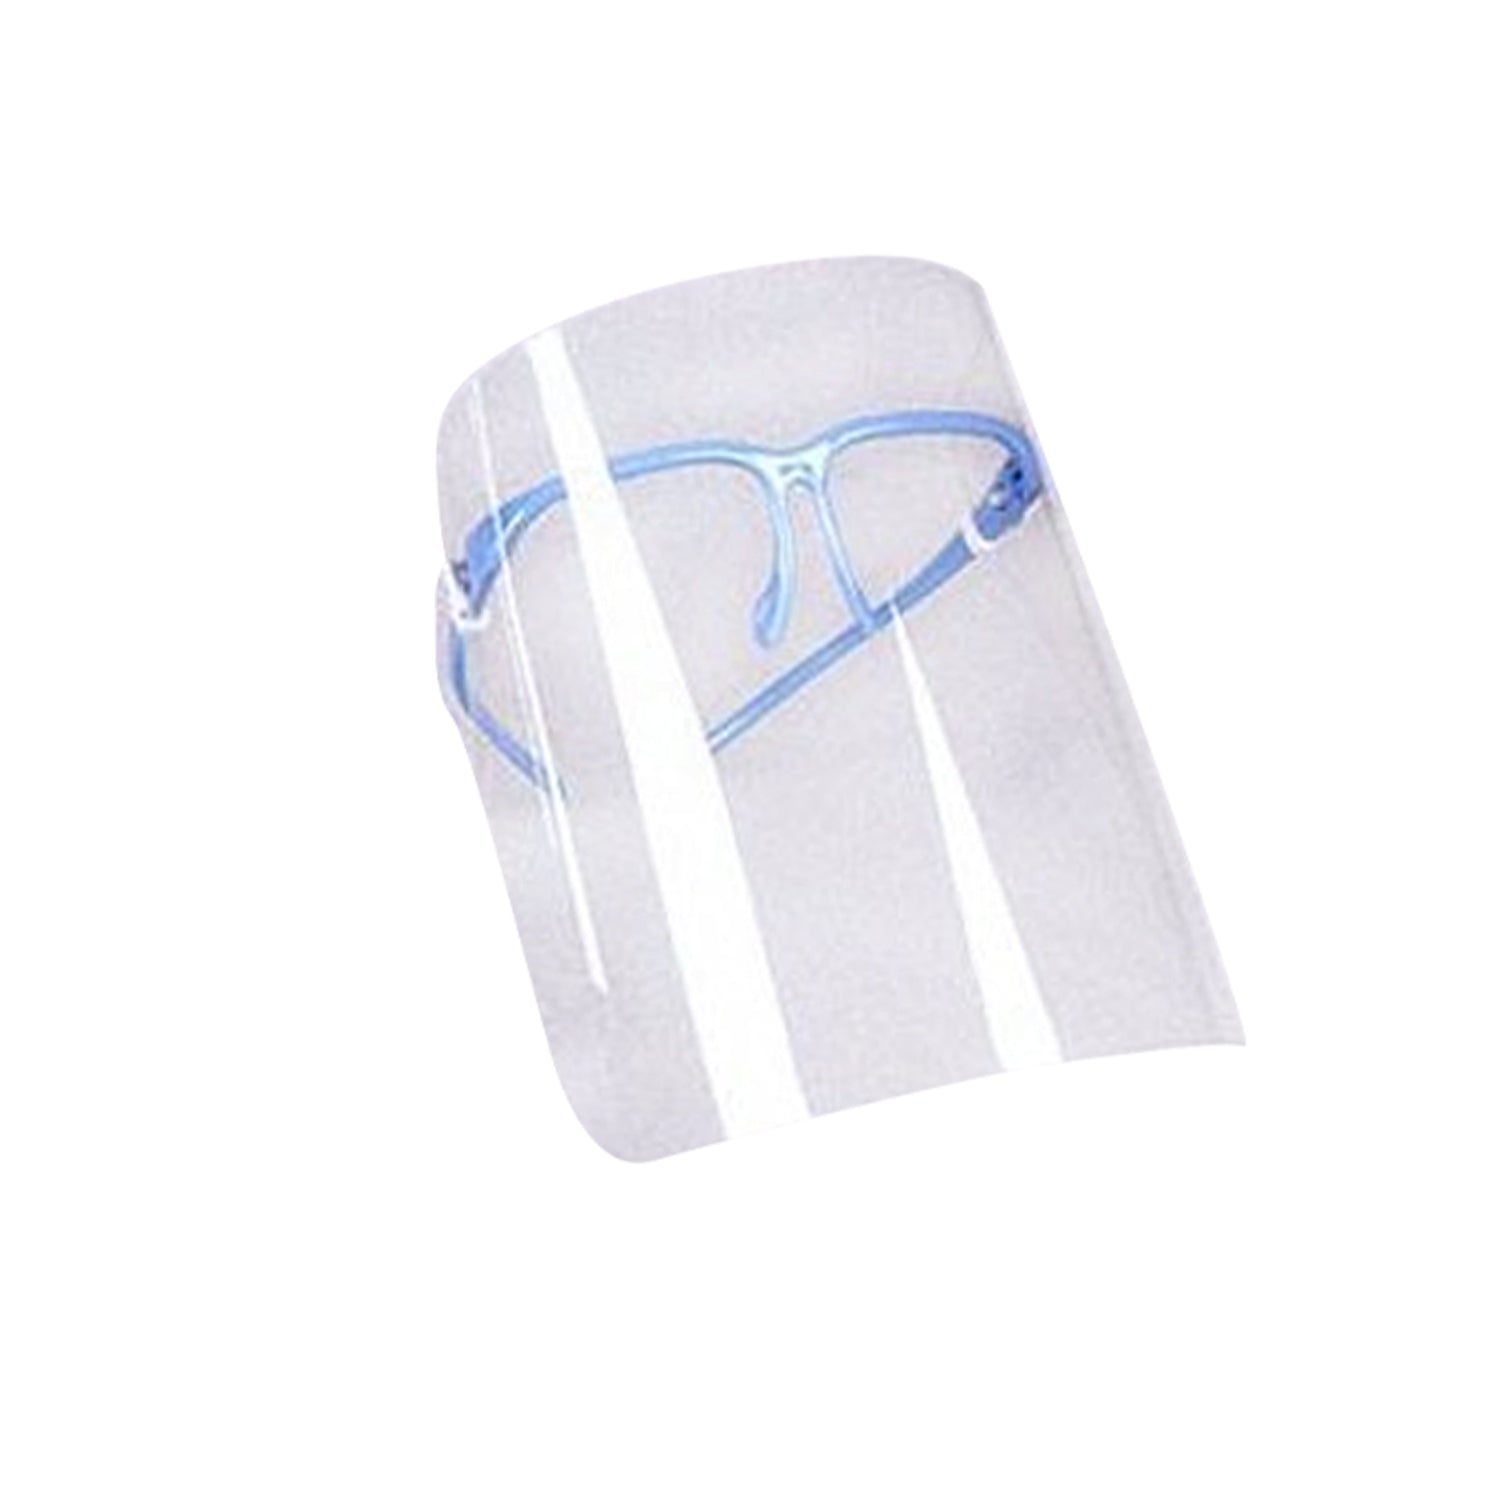 Face Protection Shields with anti-fog surface. Mask with full protection protects your eyes from droplets. Offers 180 degree protection. Made of durable acrylic materials. Comes with comfort fit acrylic glasses that can fit over most eye glasses.